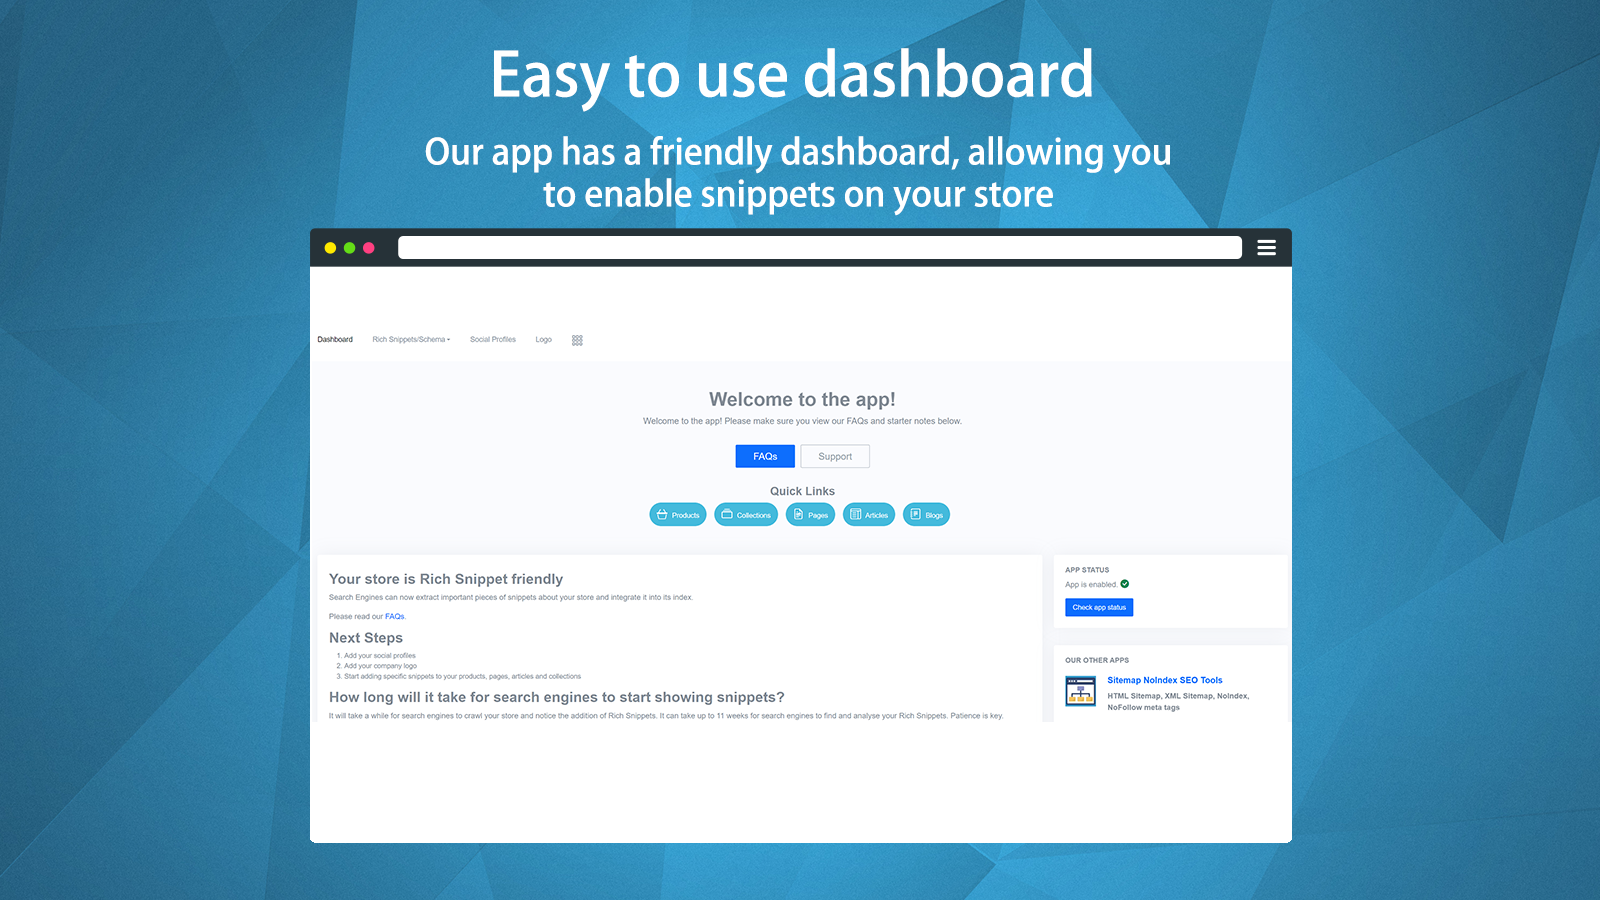 Add rich results to your store using our easy to use dashboard